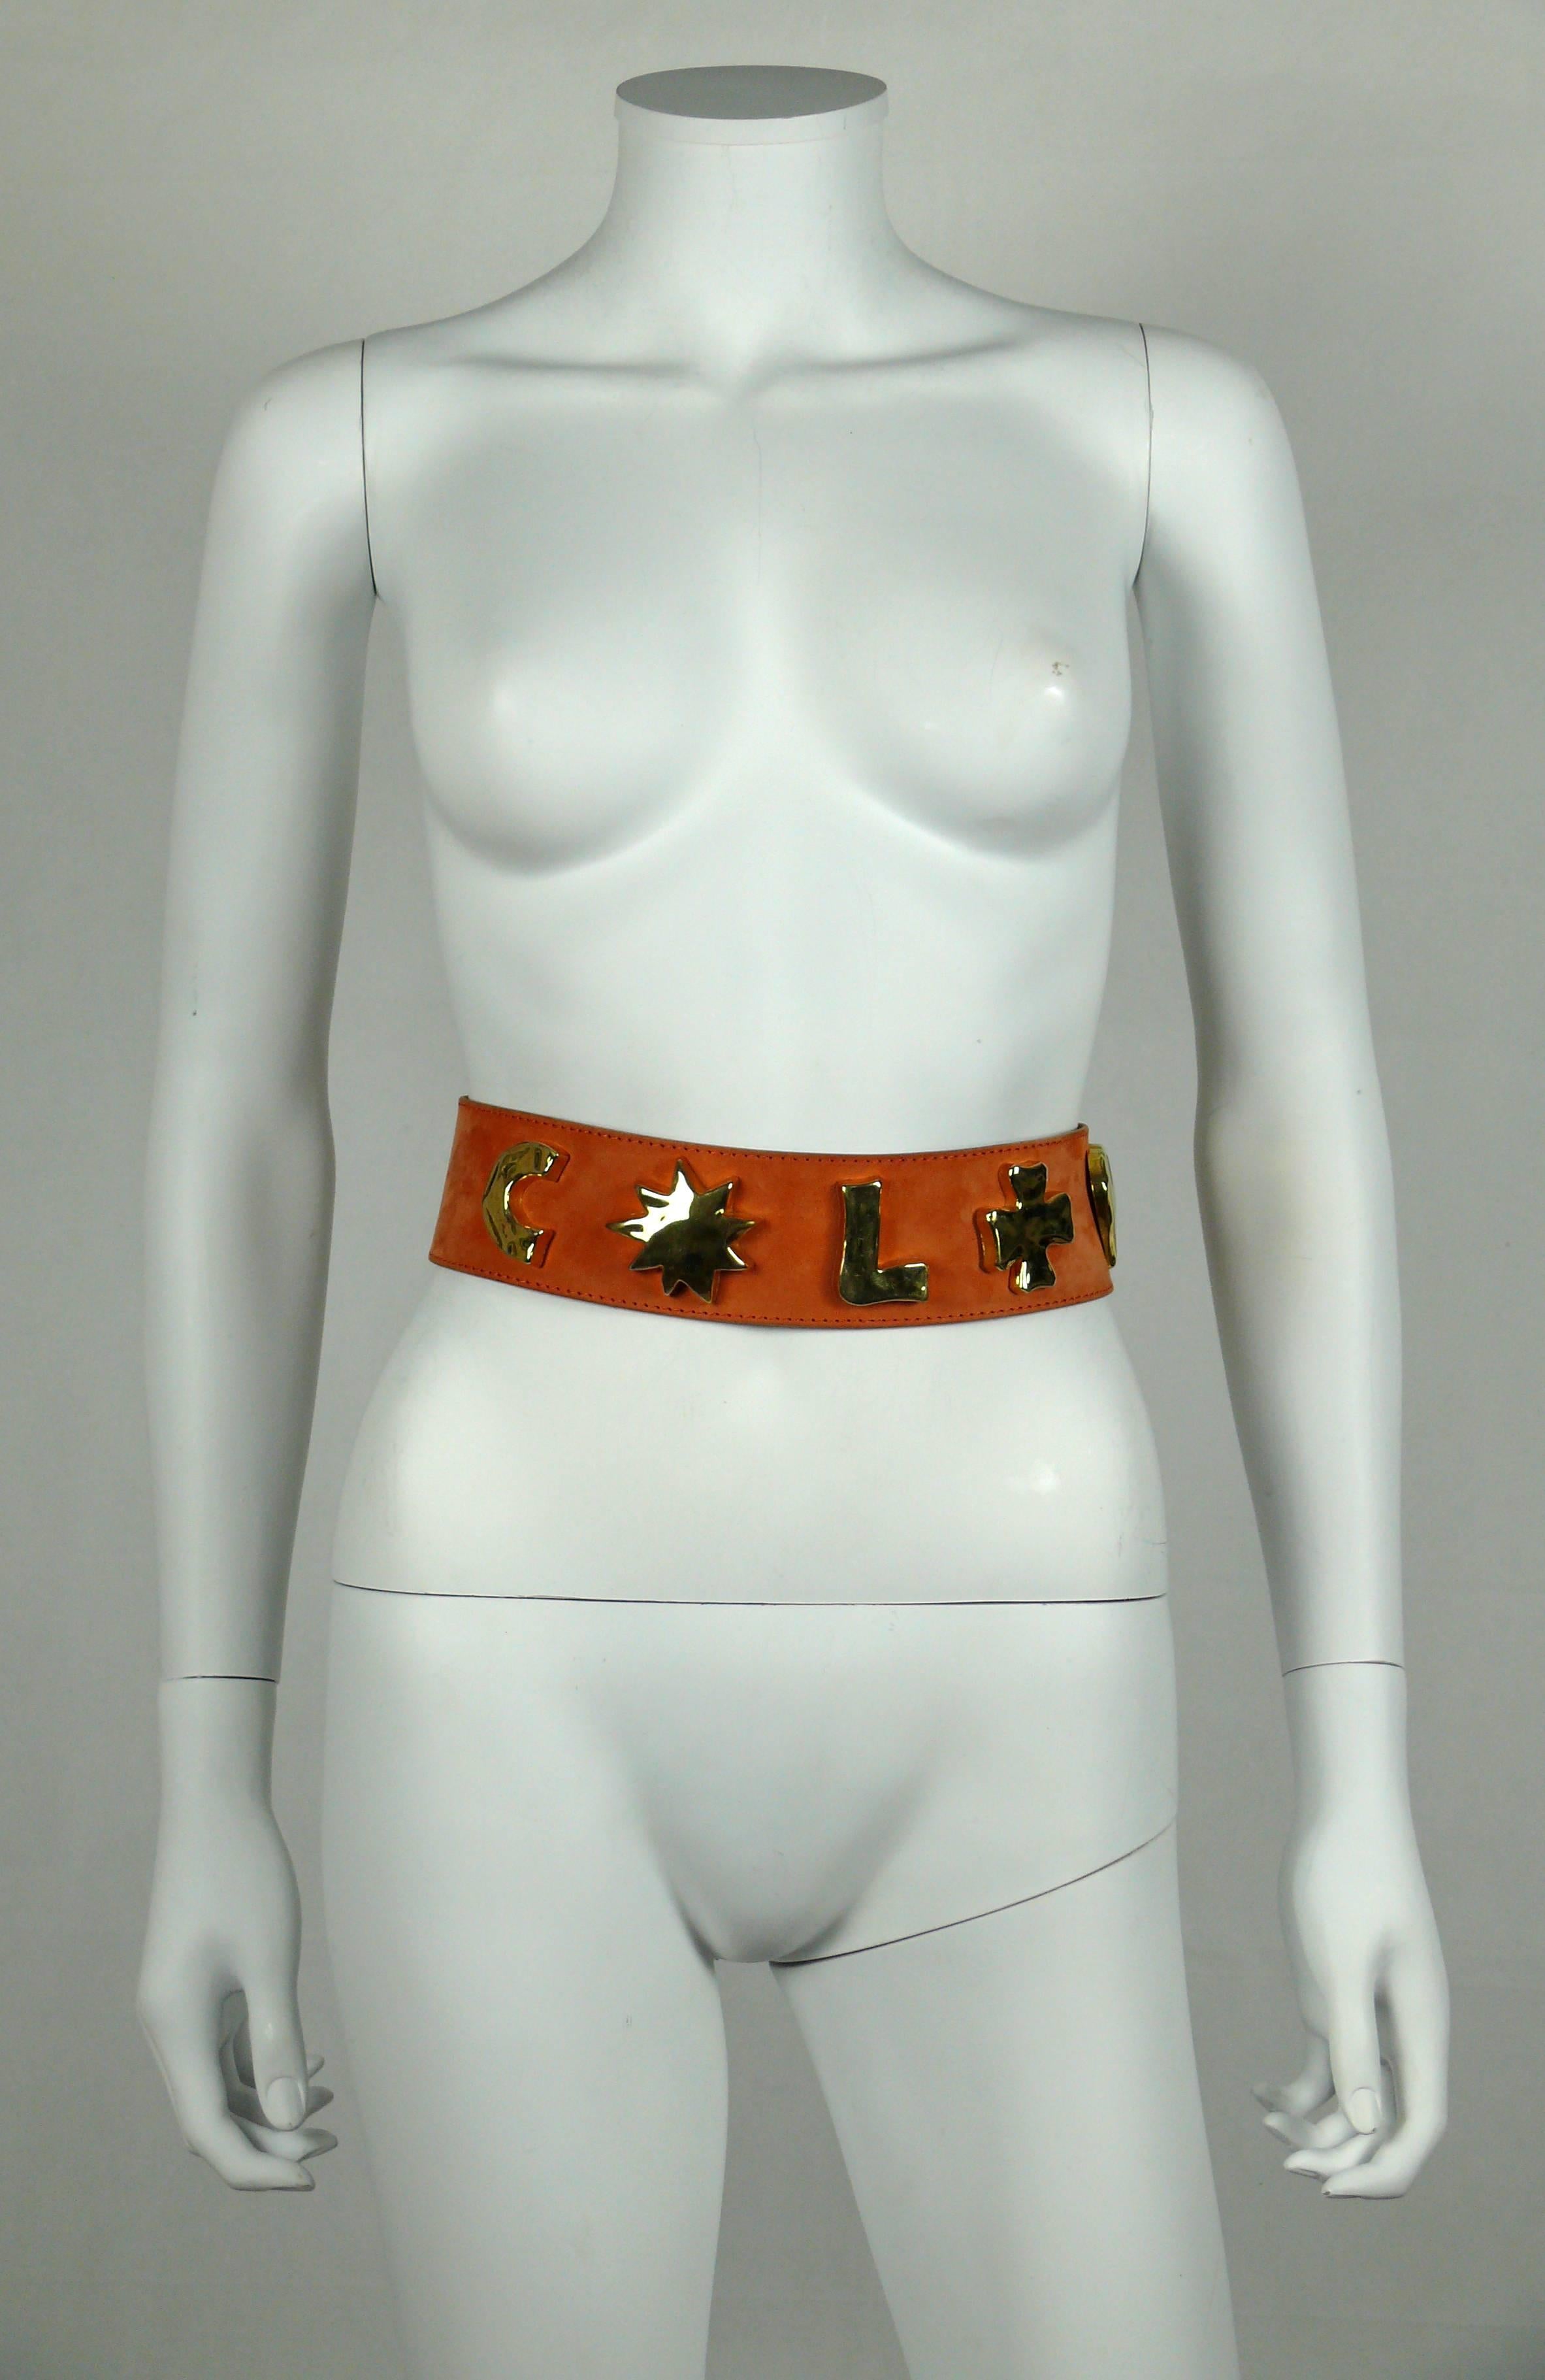 CHRISTIAN LACROIX vintage wide peach suede leather belt featuring iconic gold toned symbols (sun, cross, heart) and C.L. initials.

Hook fastening.

Marked CHRISTIAN LACROIX Paris.

Indicated size 65/26.

Made in France.

Indicative measurements :